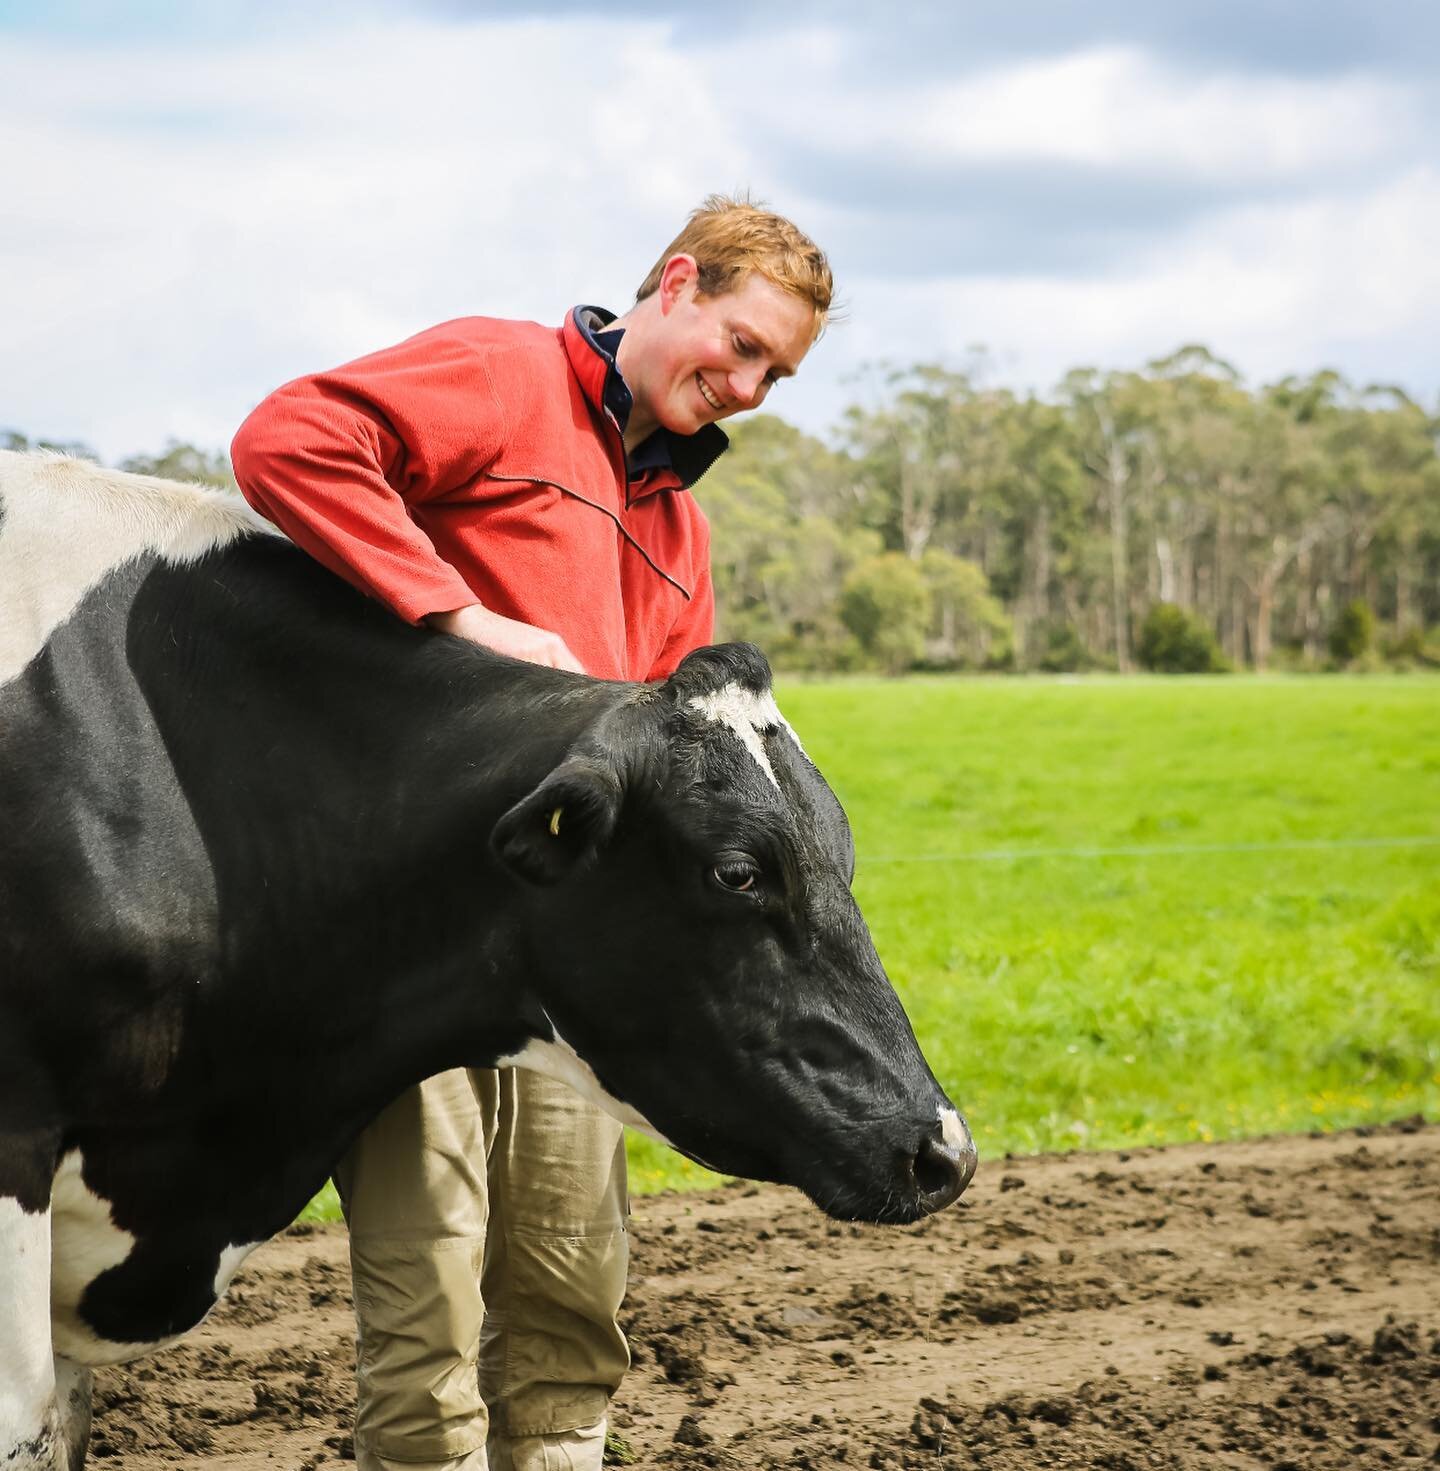 *The Bream Creek Dairy Dream Team Secures Prize for Tasmania&rsquo;s Best Milk*
&nbsp;
At last week&rsquo;s Royal Tasmania Fine Food Awards, competing against milk producers from across the state, Bream Creek Dairy&rsquo;s full cream milk took out th